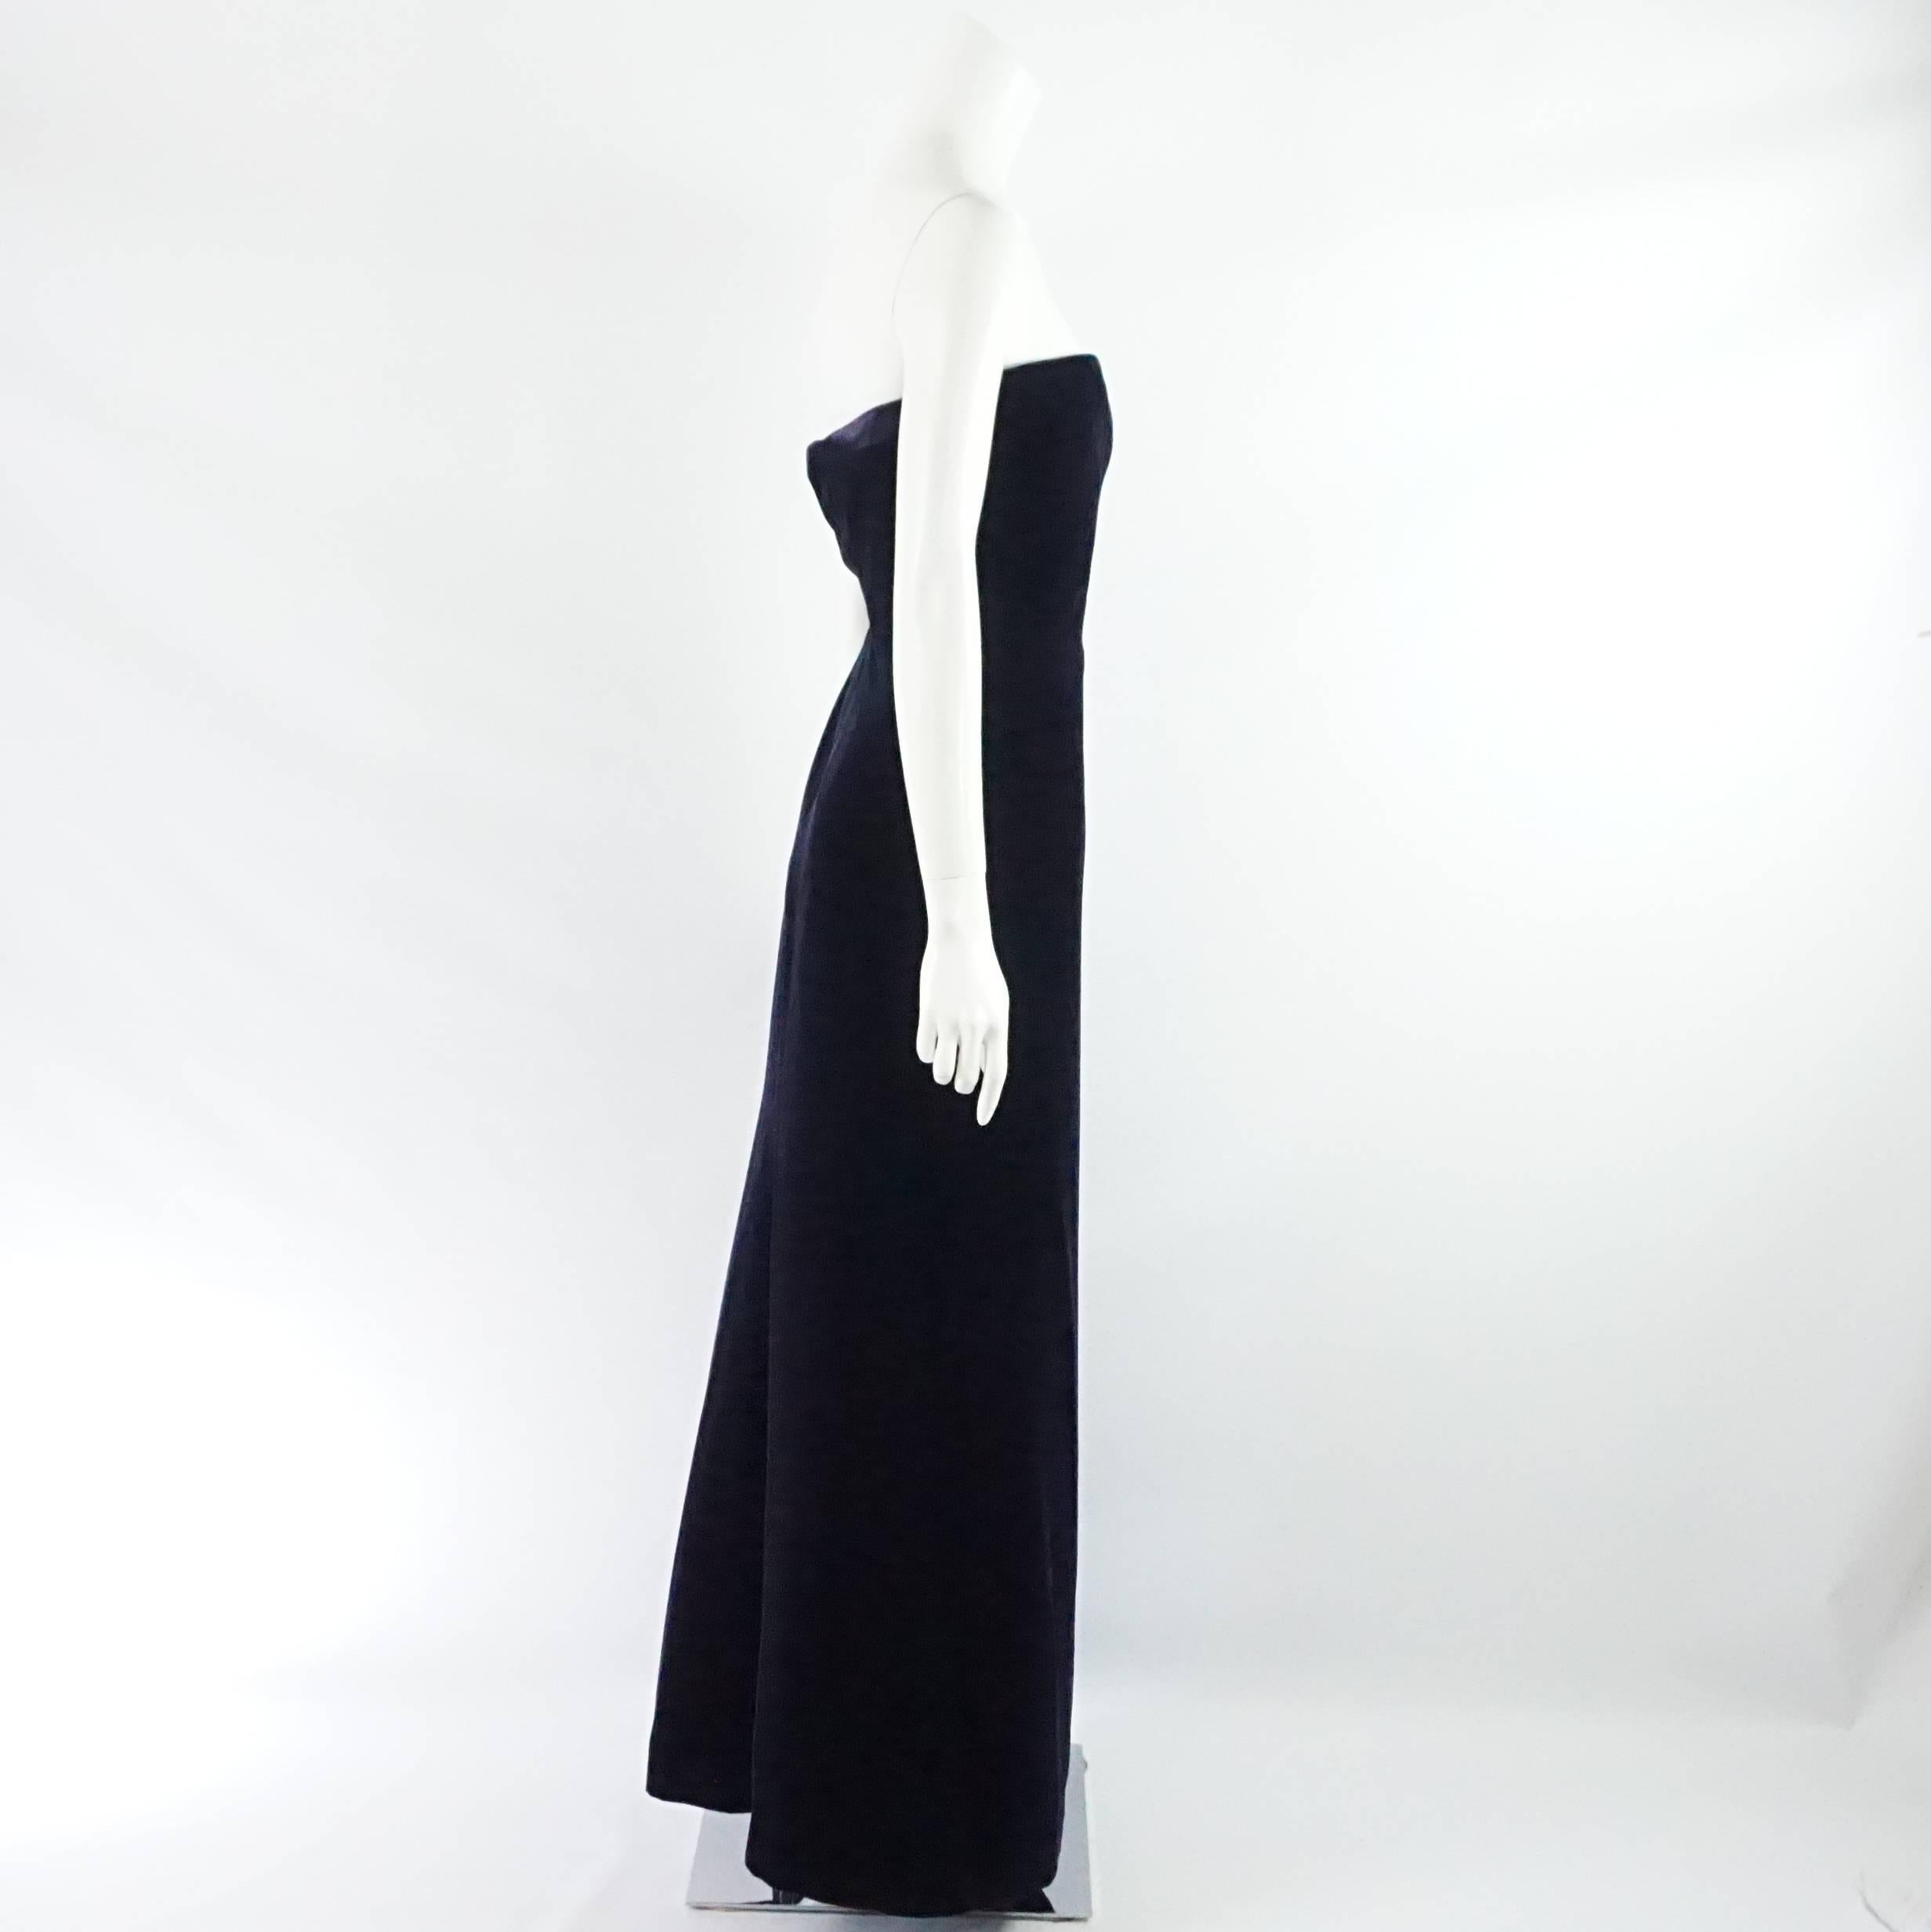 This Oscar de la Renta gown is strapless and dark navy blue velvet. It is in very good condition with minor wear on the velvet.

Measurements
Bust: 36